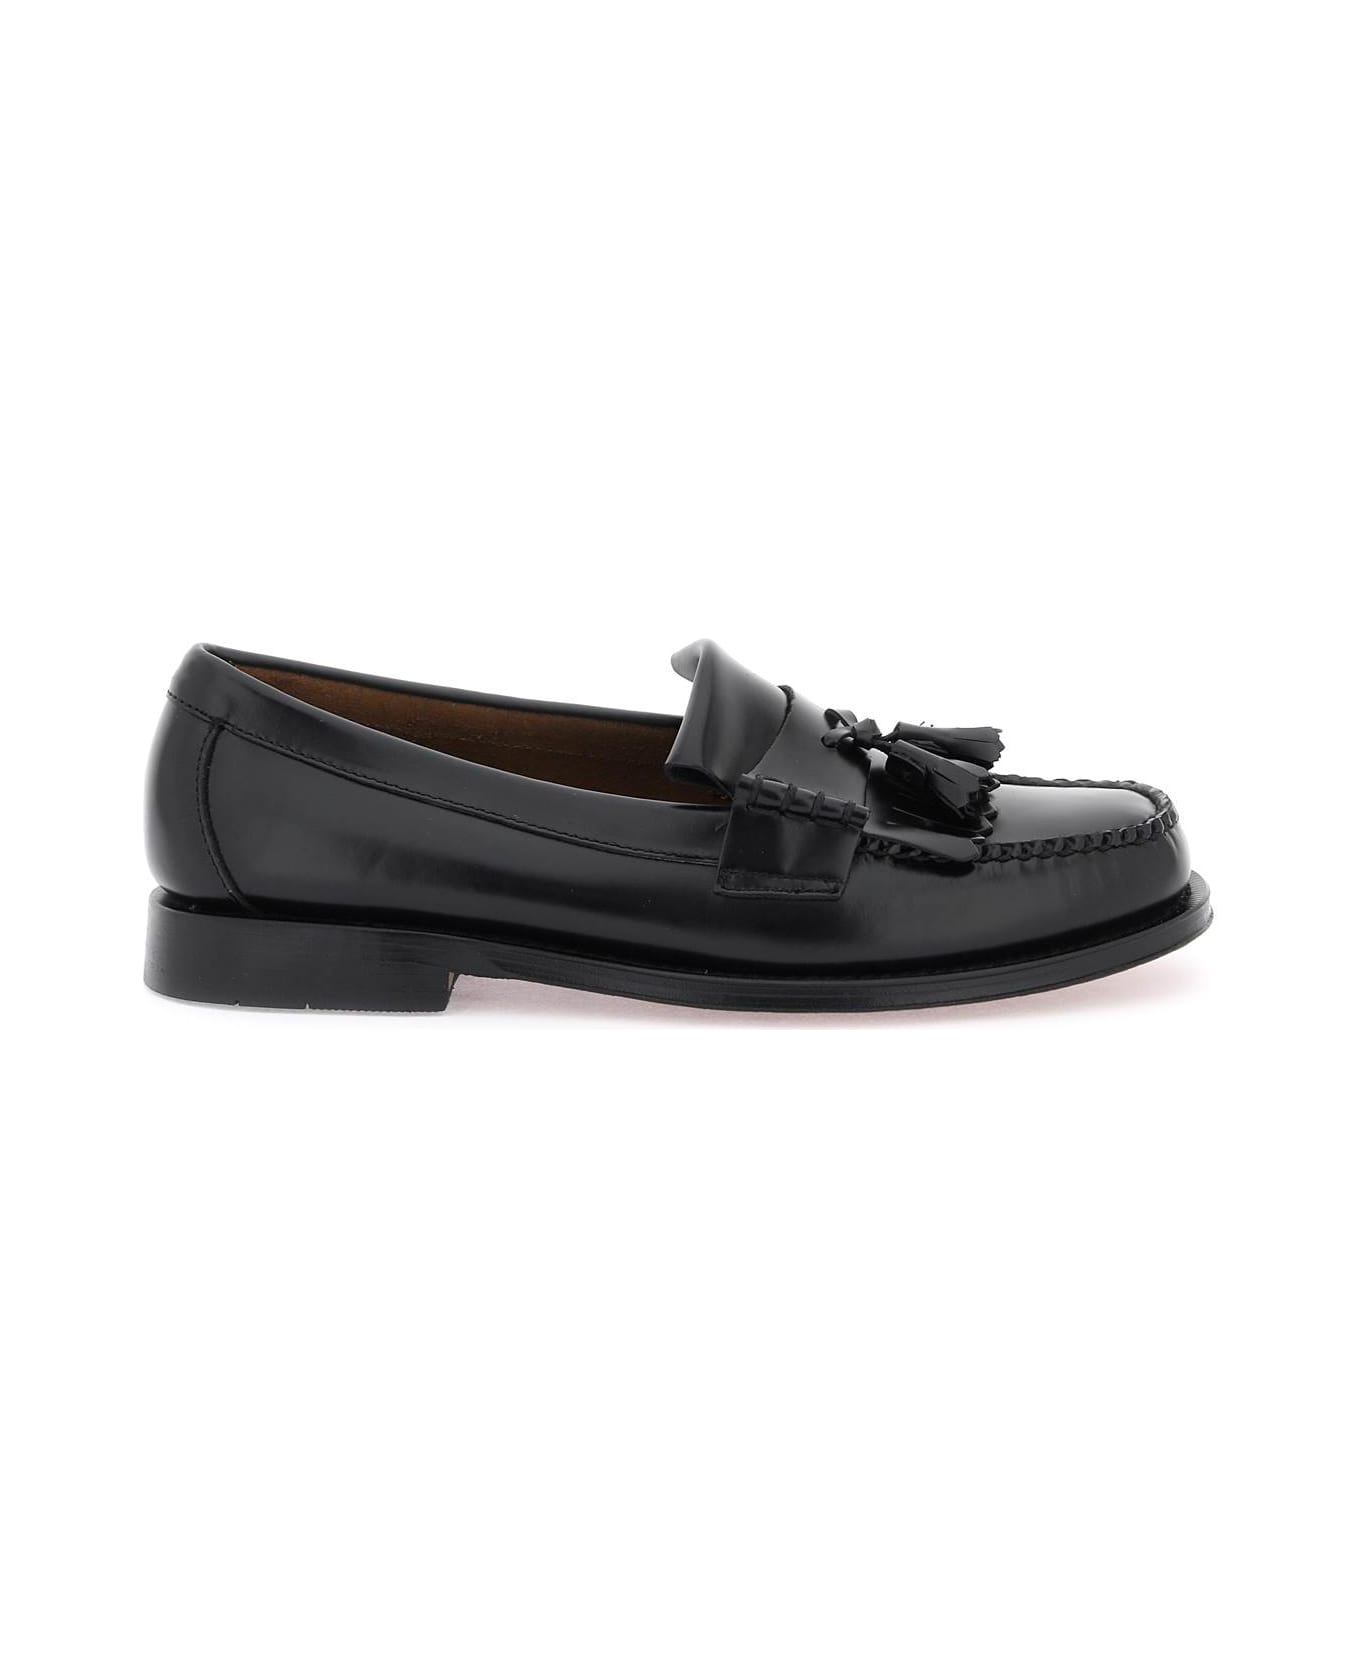 G.H.Bass & Co. Esther Kiltie Weejuns Loafers In Brushed Leather - BLACK (Black)